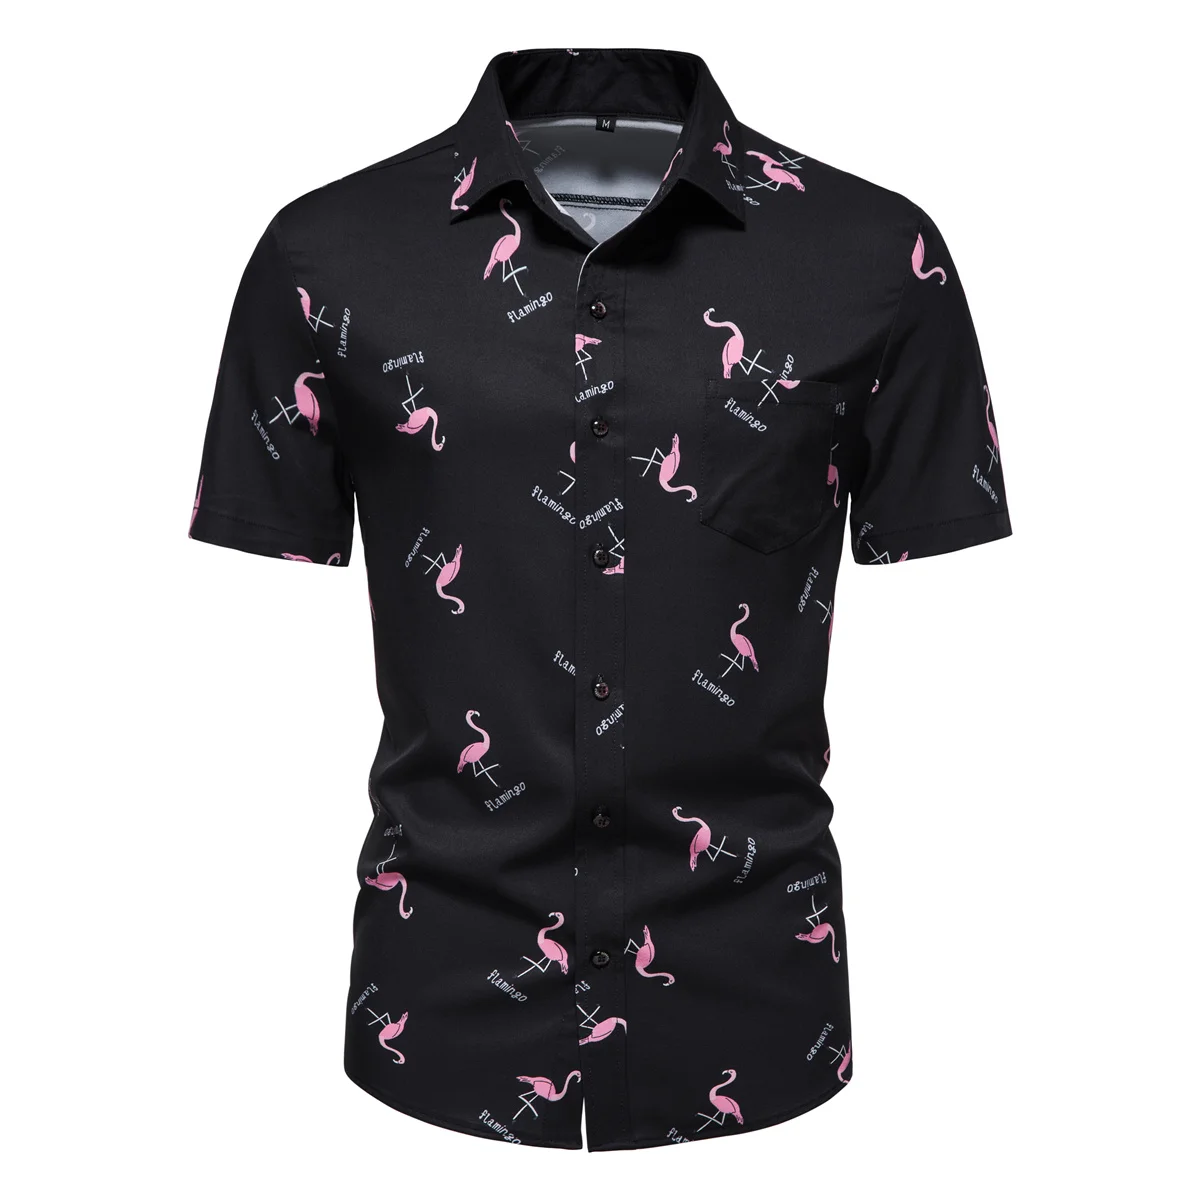 2022 New Fashion Men's Printed Short Sleeve Shirts Slim Fit Business Casual Shirts Everyday Office Shirts